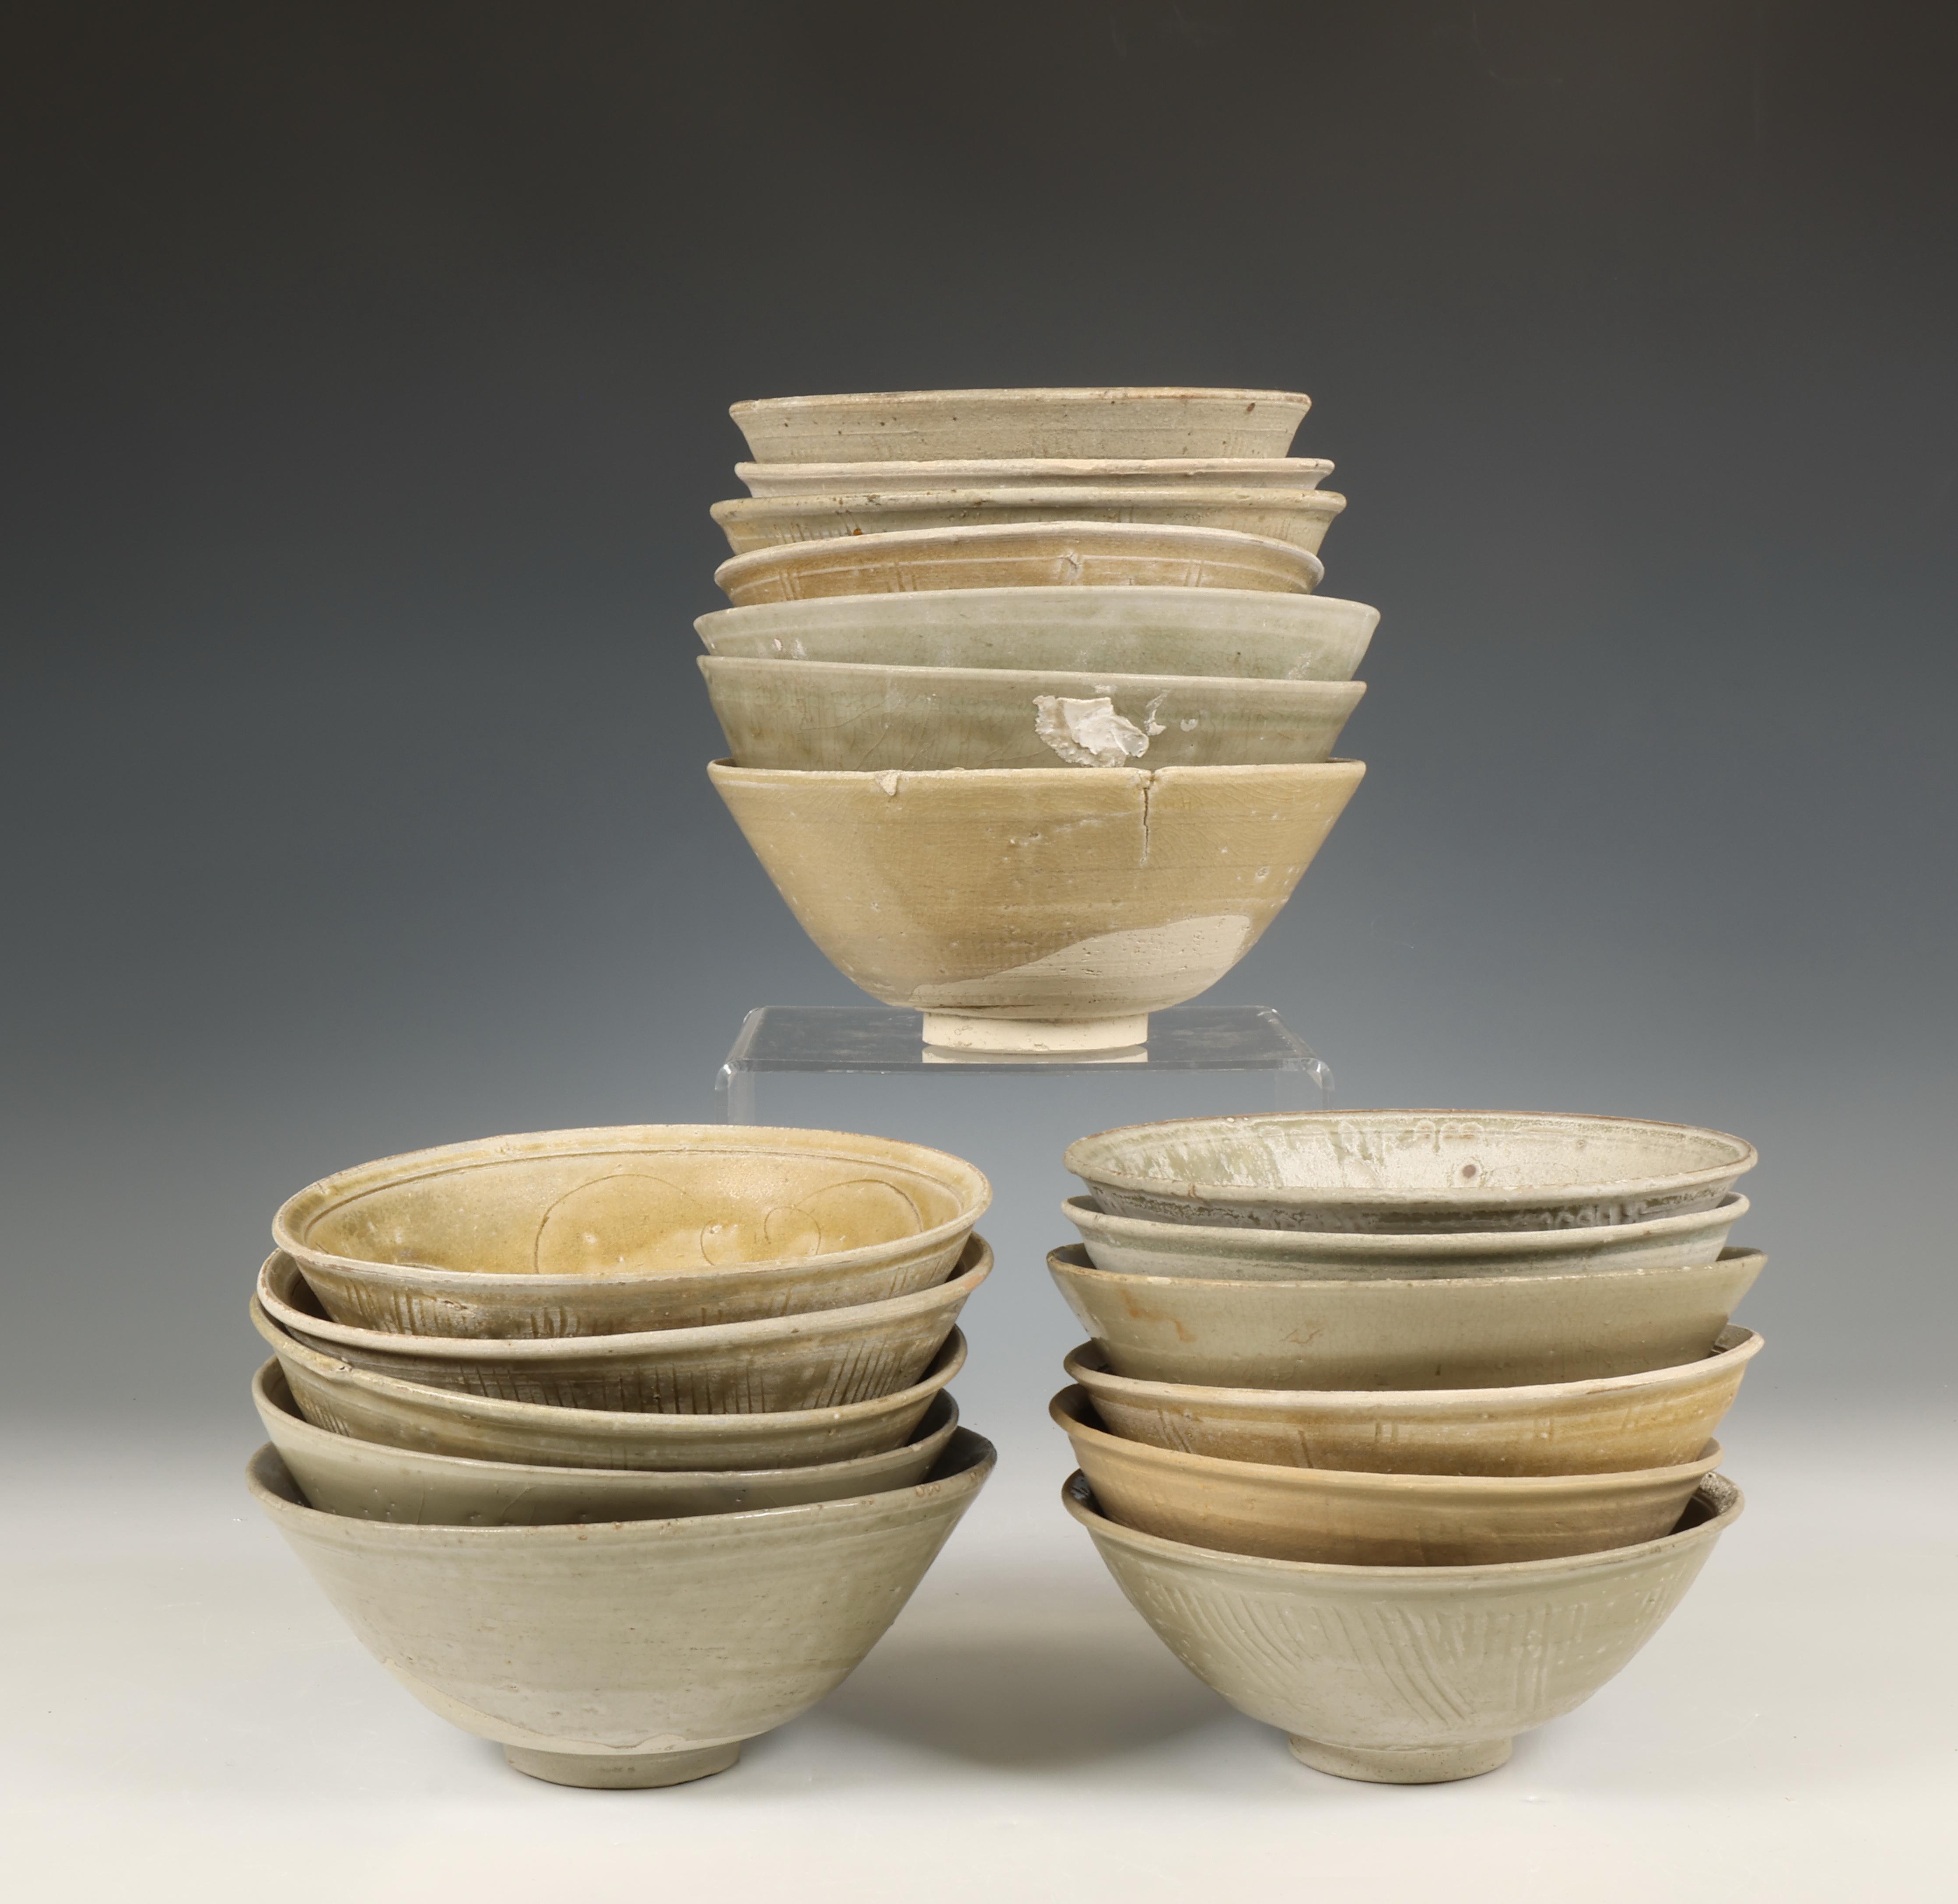 China, collection of eighteen celadon-glazed bowls, Northern Song dynasty, 10th-12th century,